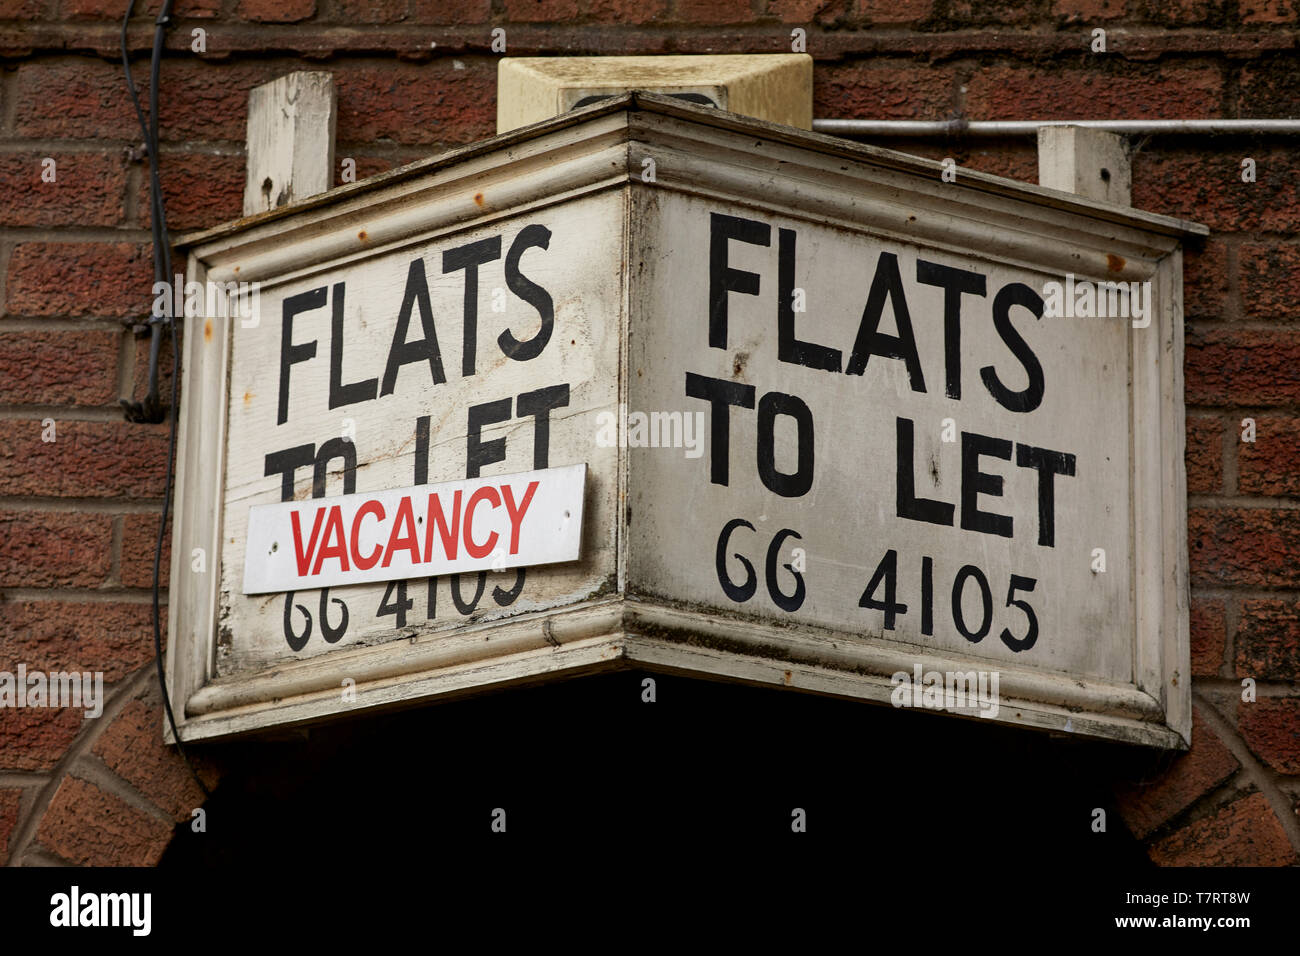 Whitchurch market town in Shropshire, England, near the Welsh border. Flats to let sign vacancy board Stock Photo